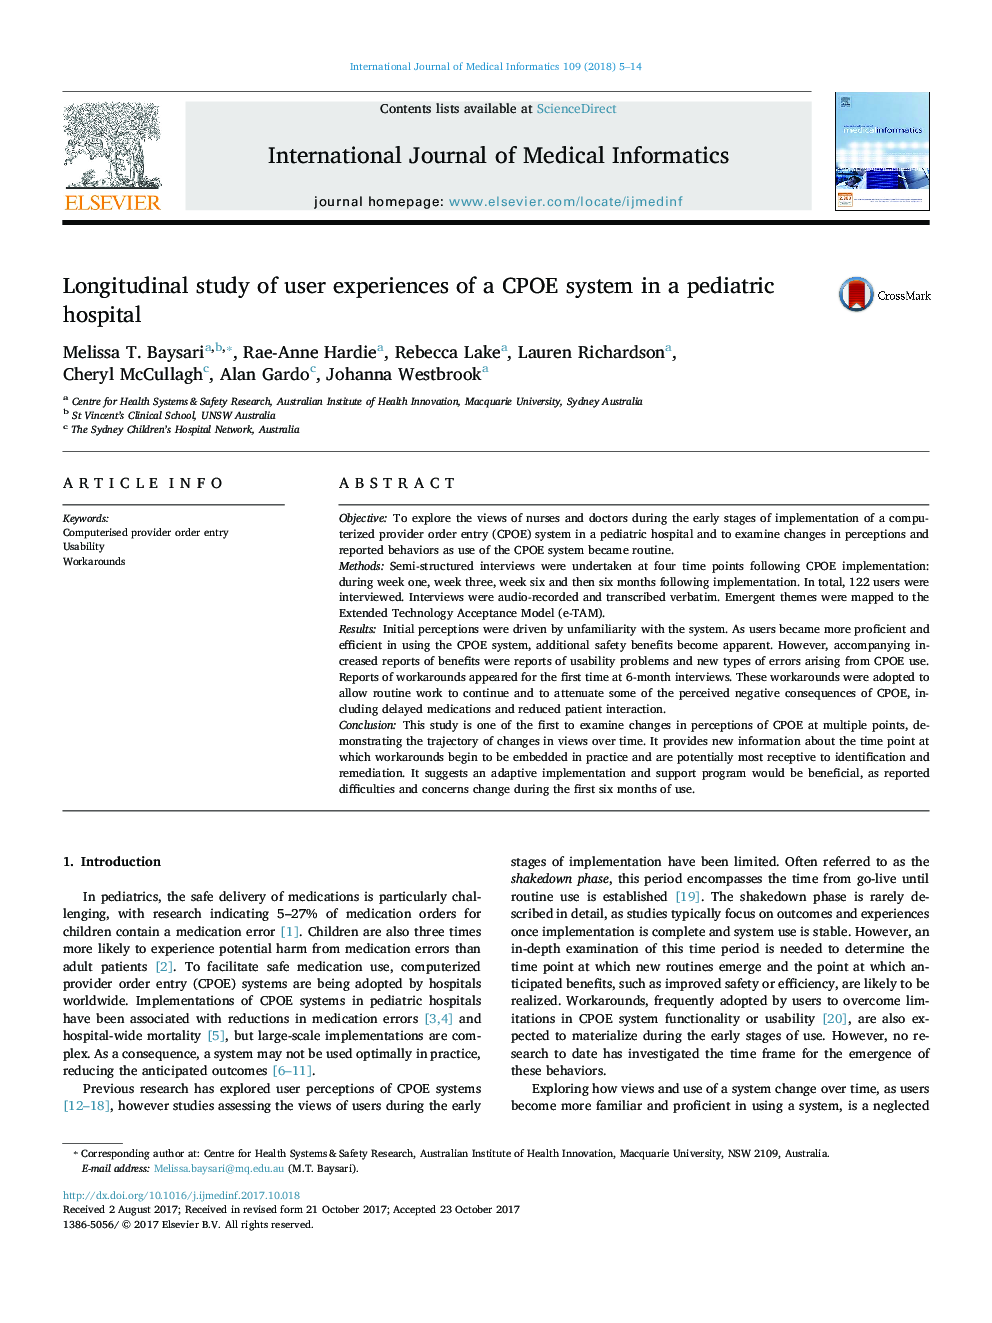 Longitudinal study of user experiences of a CPOE system in a pediatric hospital